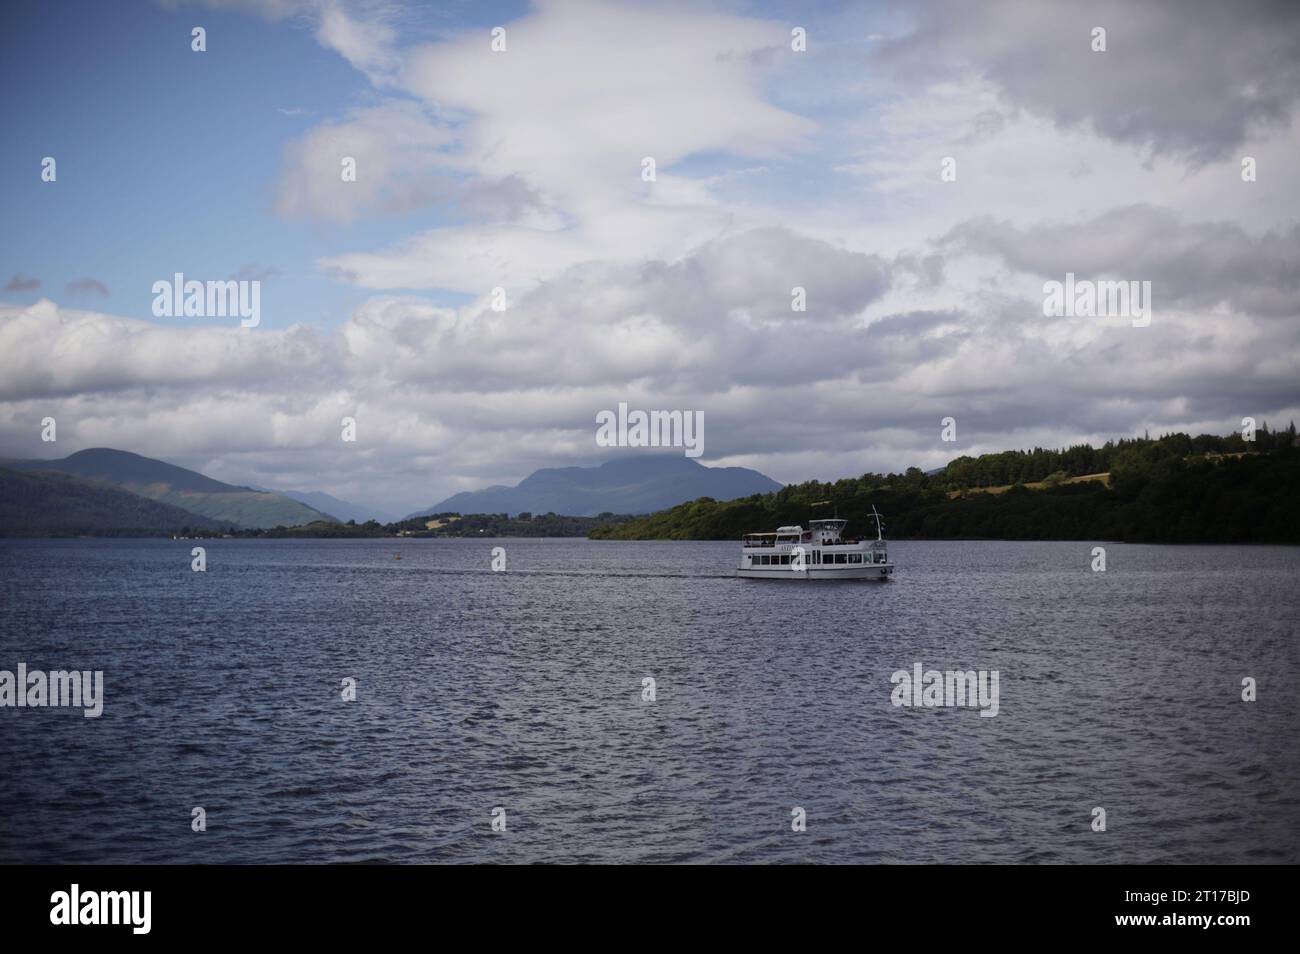 File photo dated 16/07/2014 of a pleasure cruise sails into the southern end of Loch Lomond, in Scotland. Nominations have opened for Scotland's next national park, with 10 expressions of interest already lodged with the Government. Communities and organisations have been asked to submit their plans to become the third national park - after Loch Lomond and the Trossachs, and the Cairngorms. A number of areas have already submitted expressions of interest, including Galloway, the Scottish Borders, the Tay Forest, Lochaber, Skye and Raasay, Affric to Alladale, Glen Affric, the Lammermuirs, Largo Stock Photo